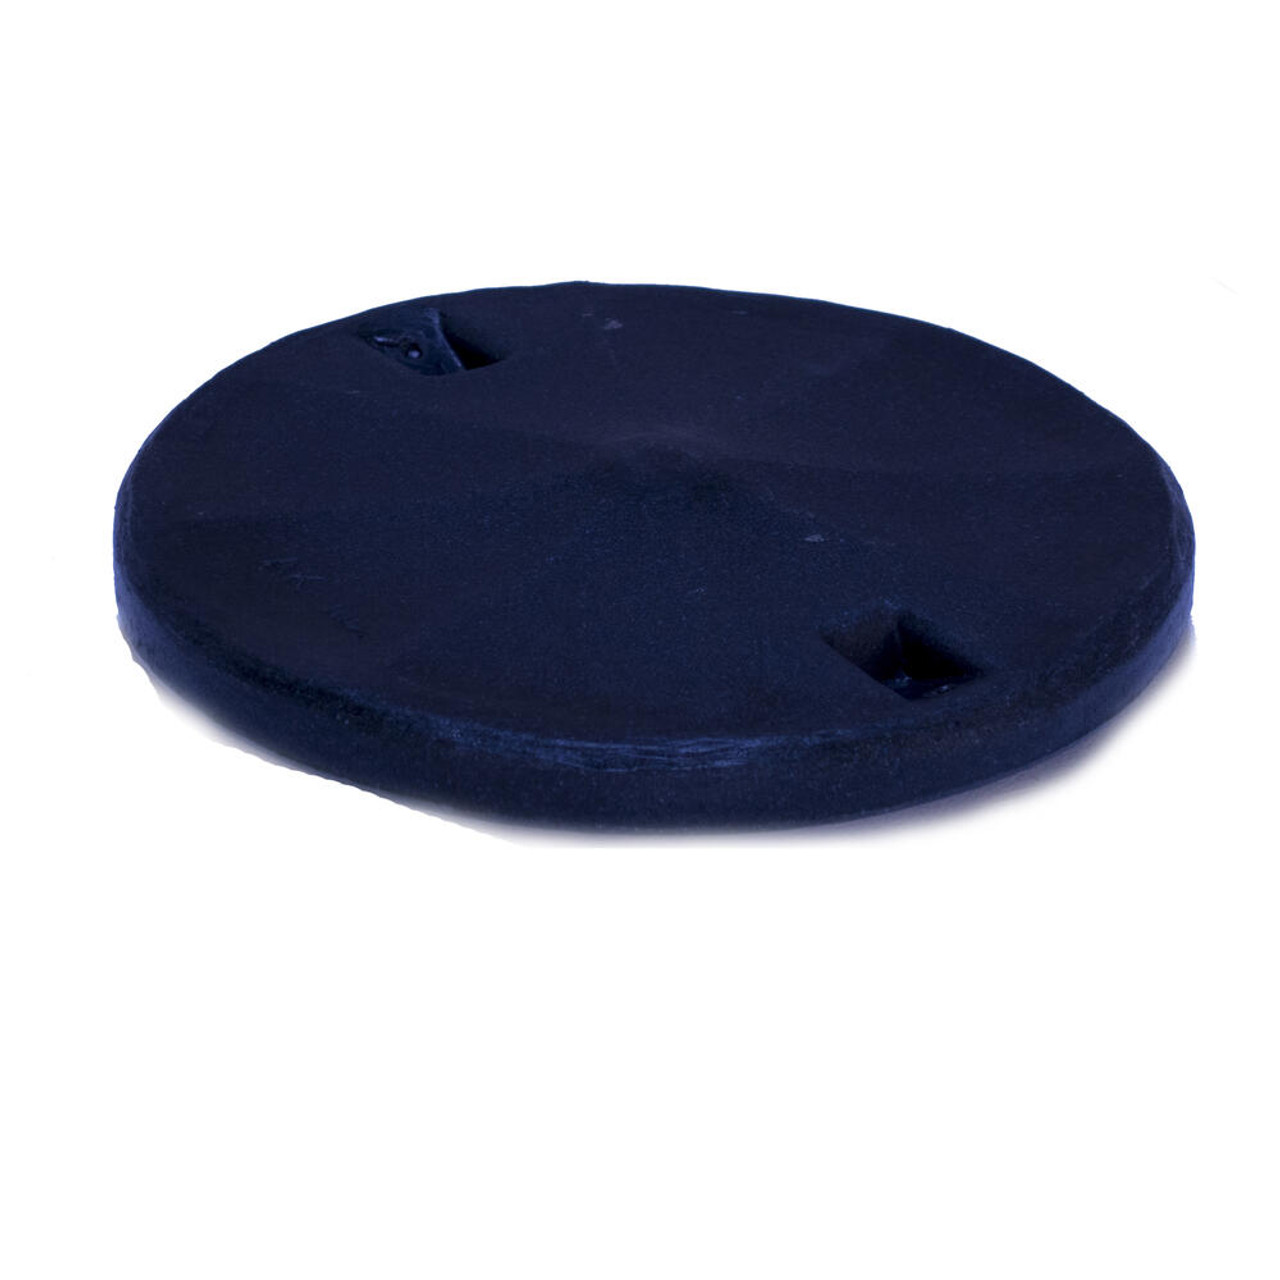 An image of a 10" Septic Tank Cover | AKS10000